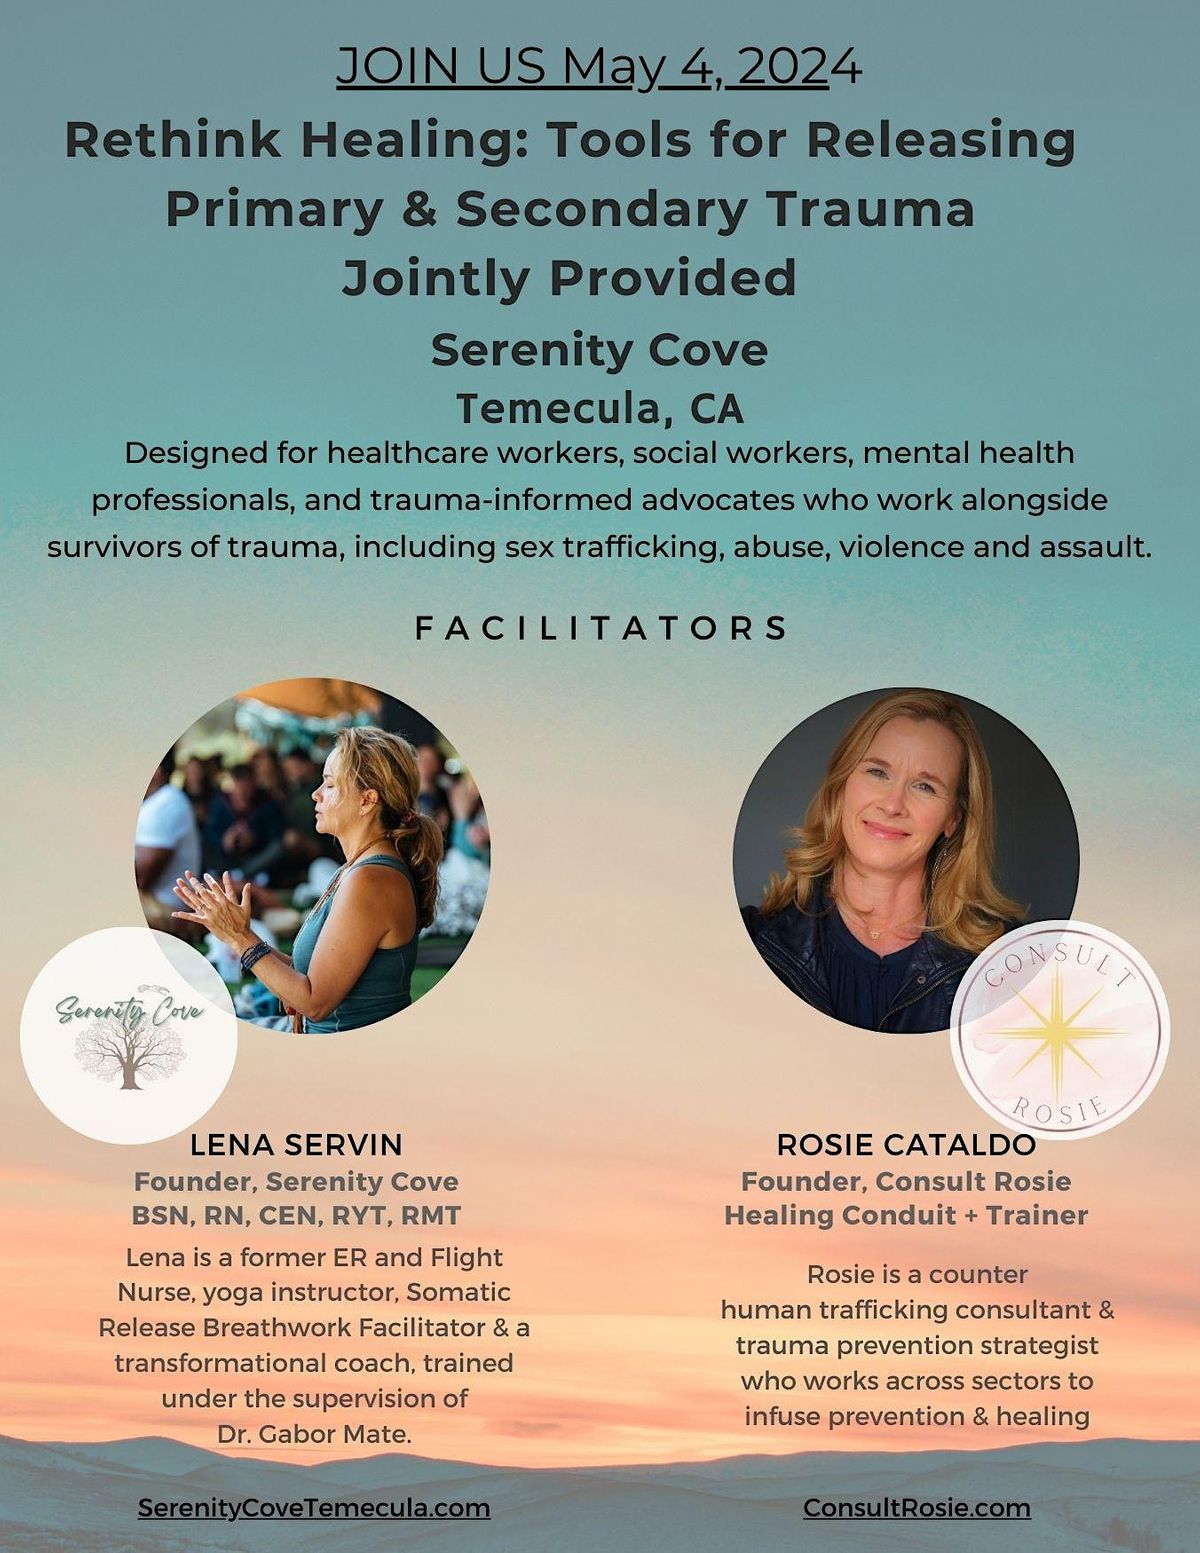 RETHINK HEALING: TOOLS FOR RELEASING PRIMARY & SECONDARY TRAUMA